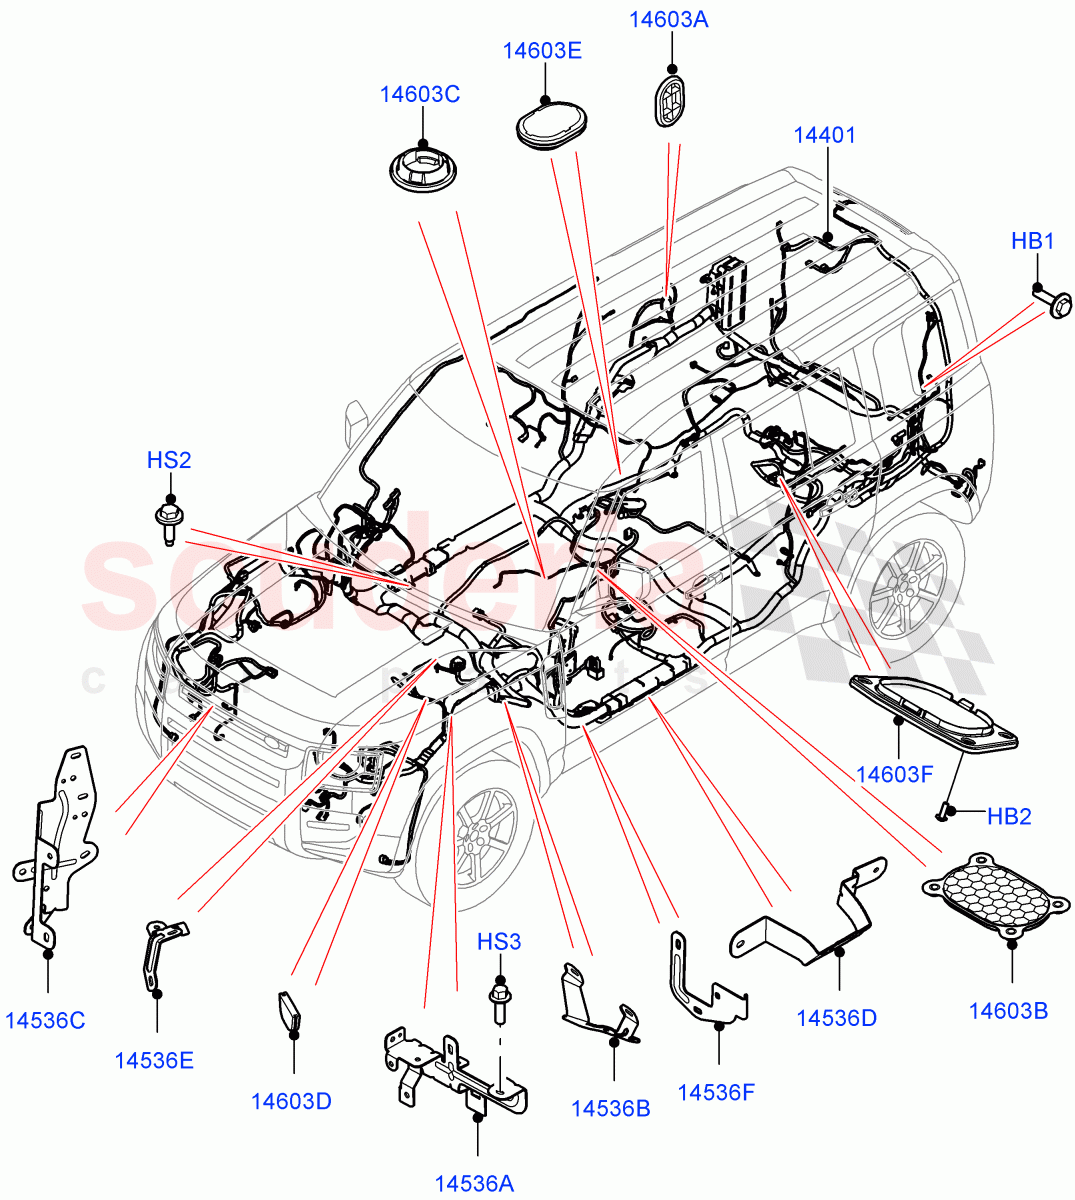 Electrical Wiring - Engine And Dash(Main Harness) of Land Rover Land Rover Defender (2020+) [2.0 Turbo Petrol AJ200P]